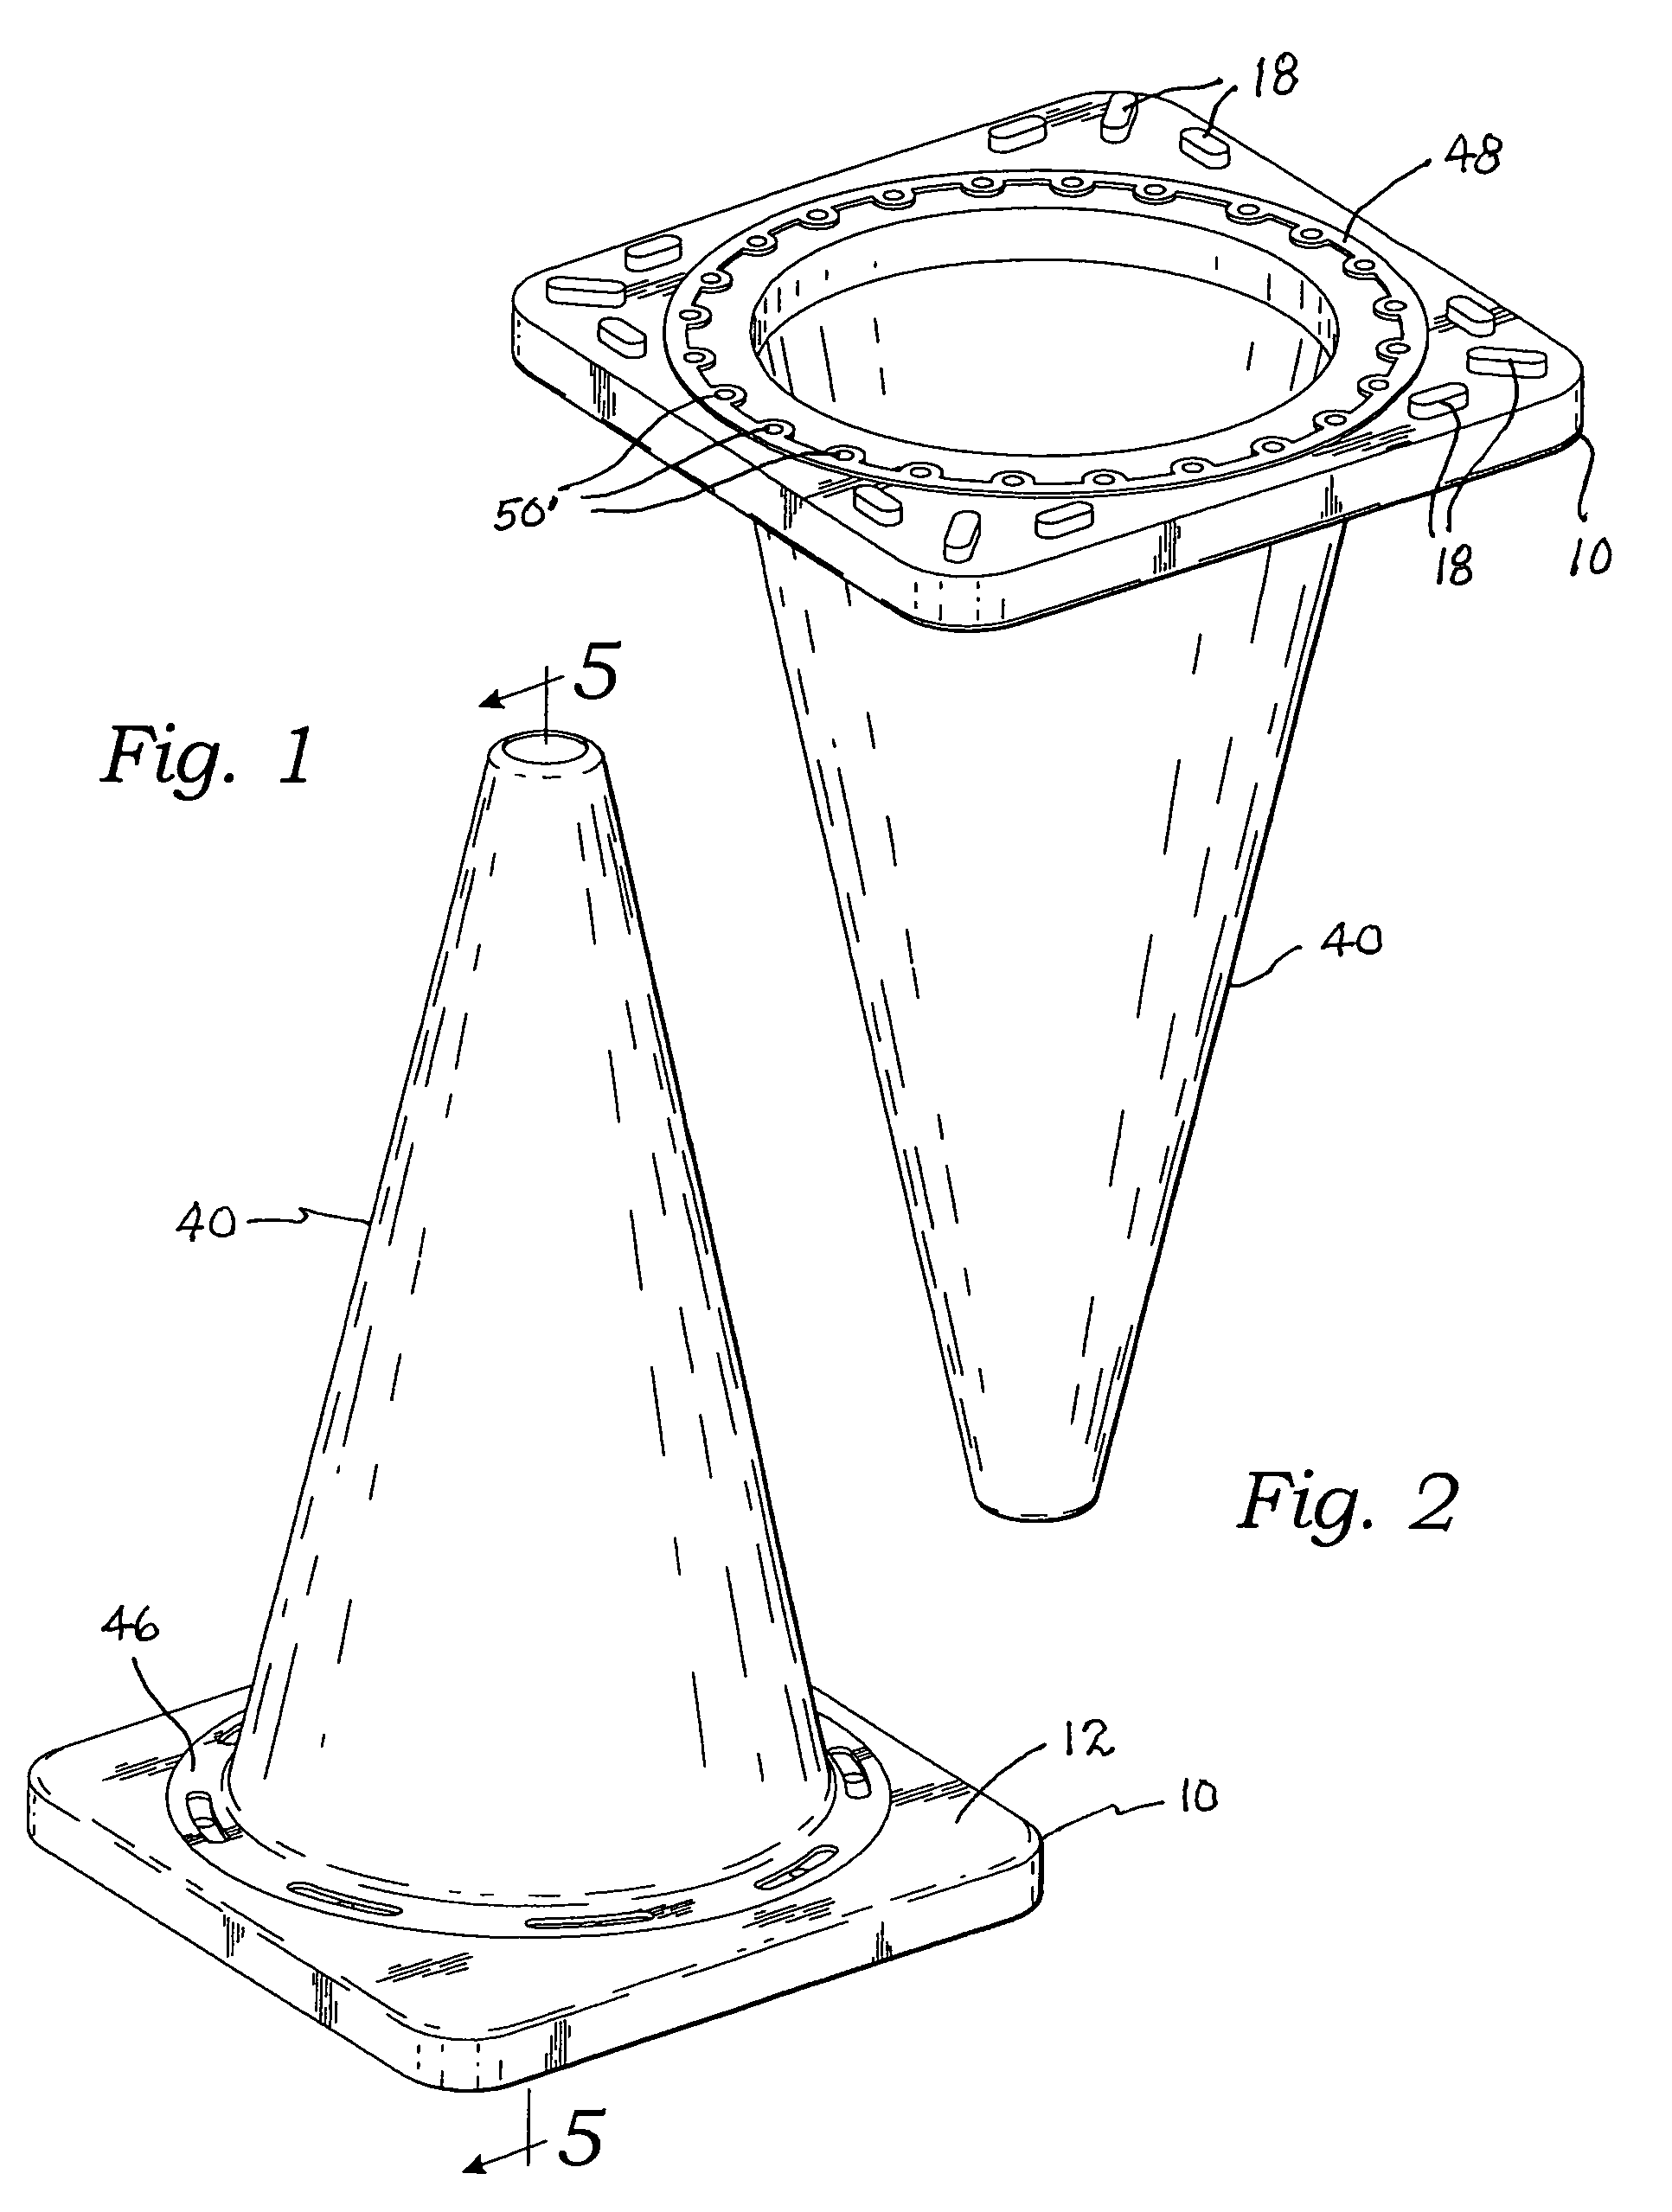 Traffic cone apparatus and method of production